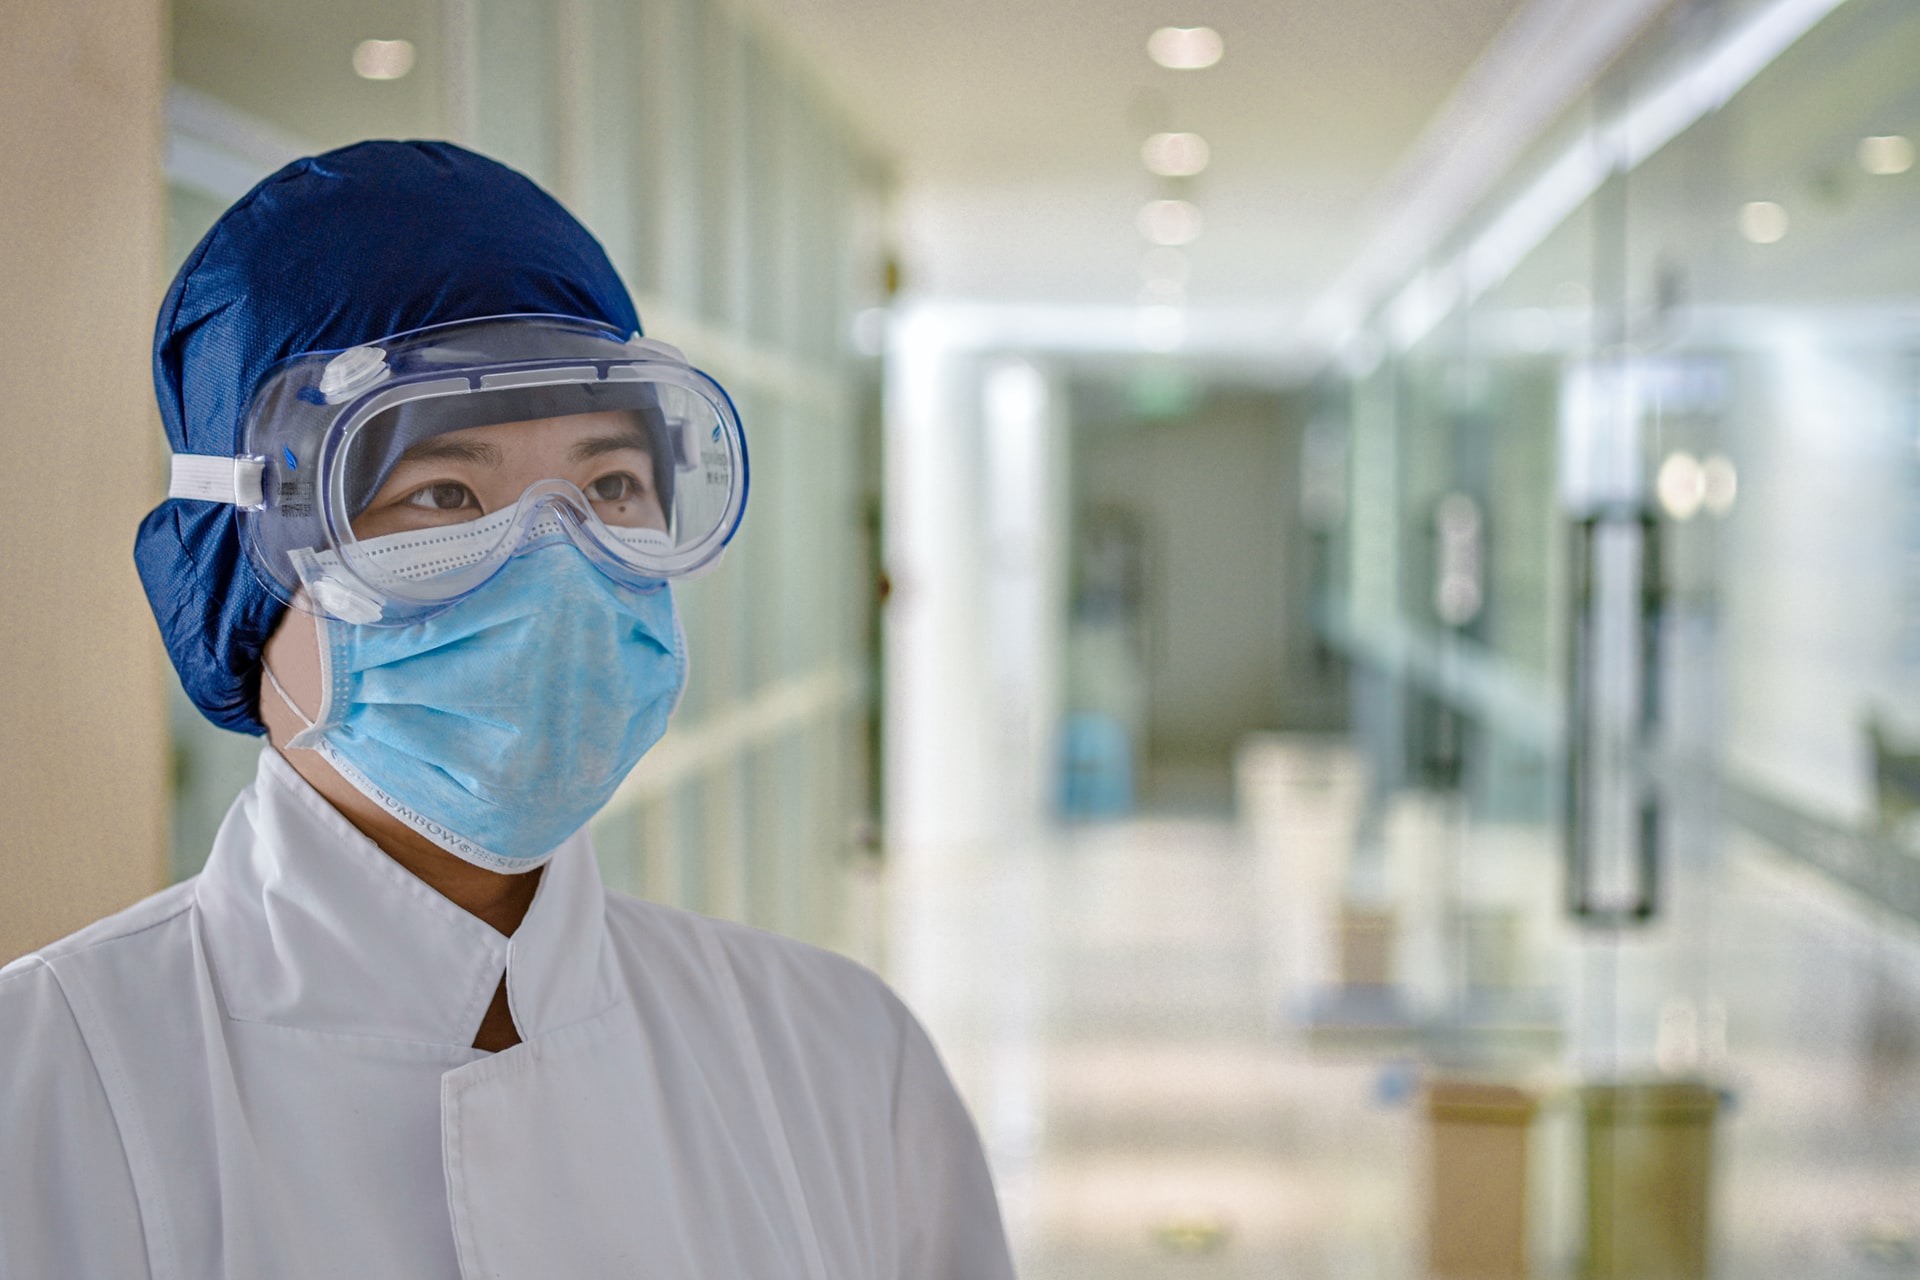 Medical person in protective clothing standing in hospital